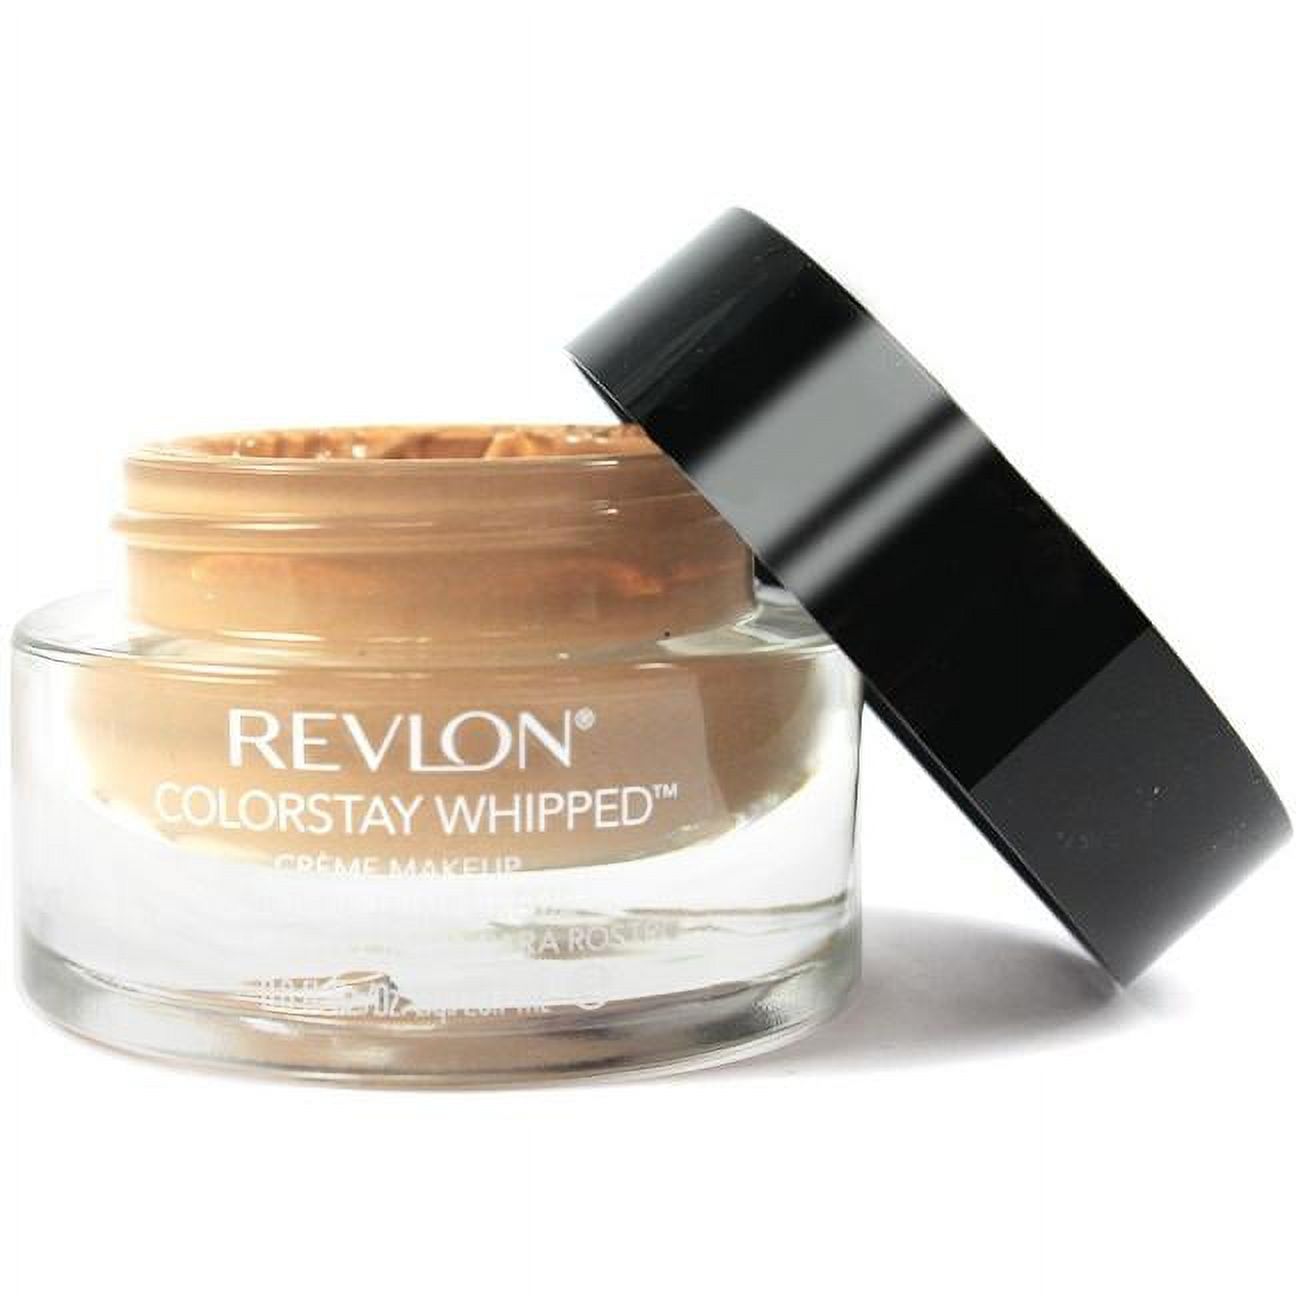 Revlon ColorStay Whipped Creme Makeup, Warm Golden - image 2 of 15